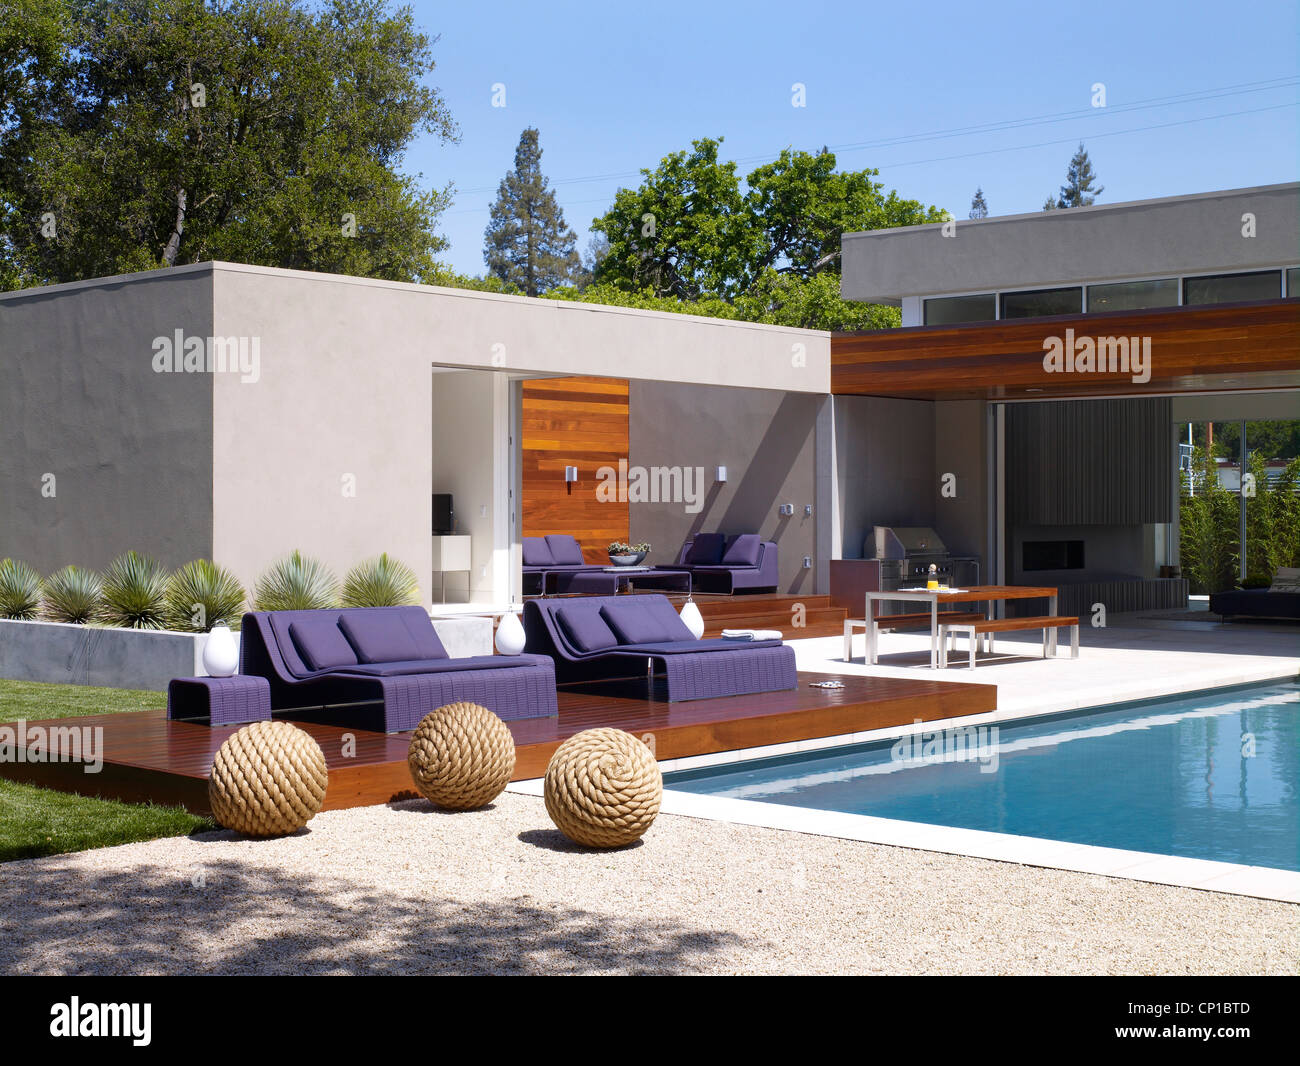 Pool terrace with outdoor furniture Stock Photo